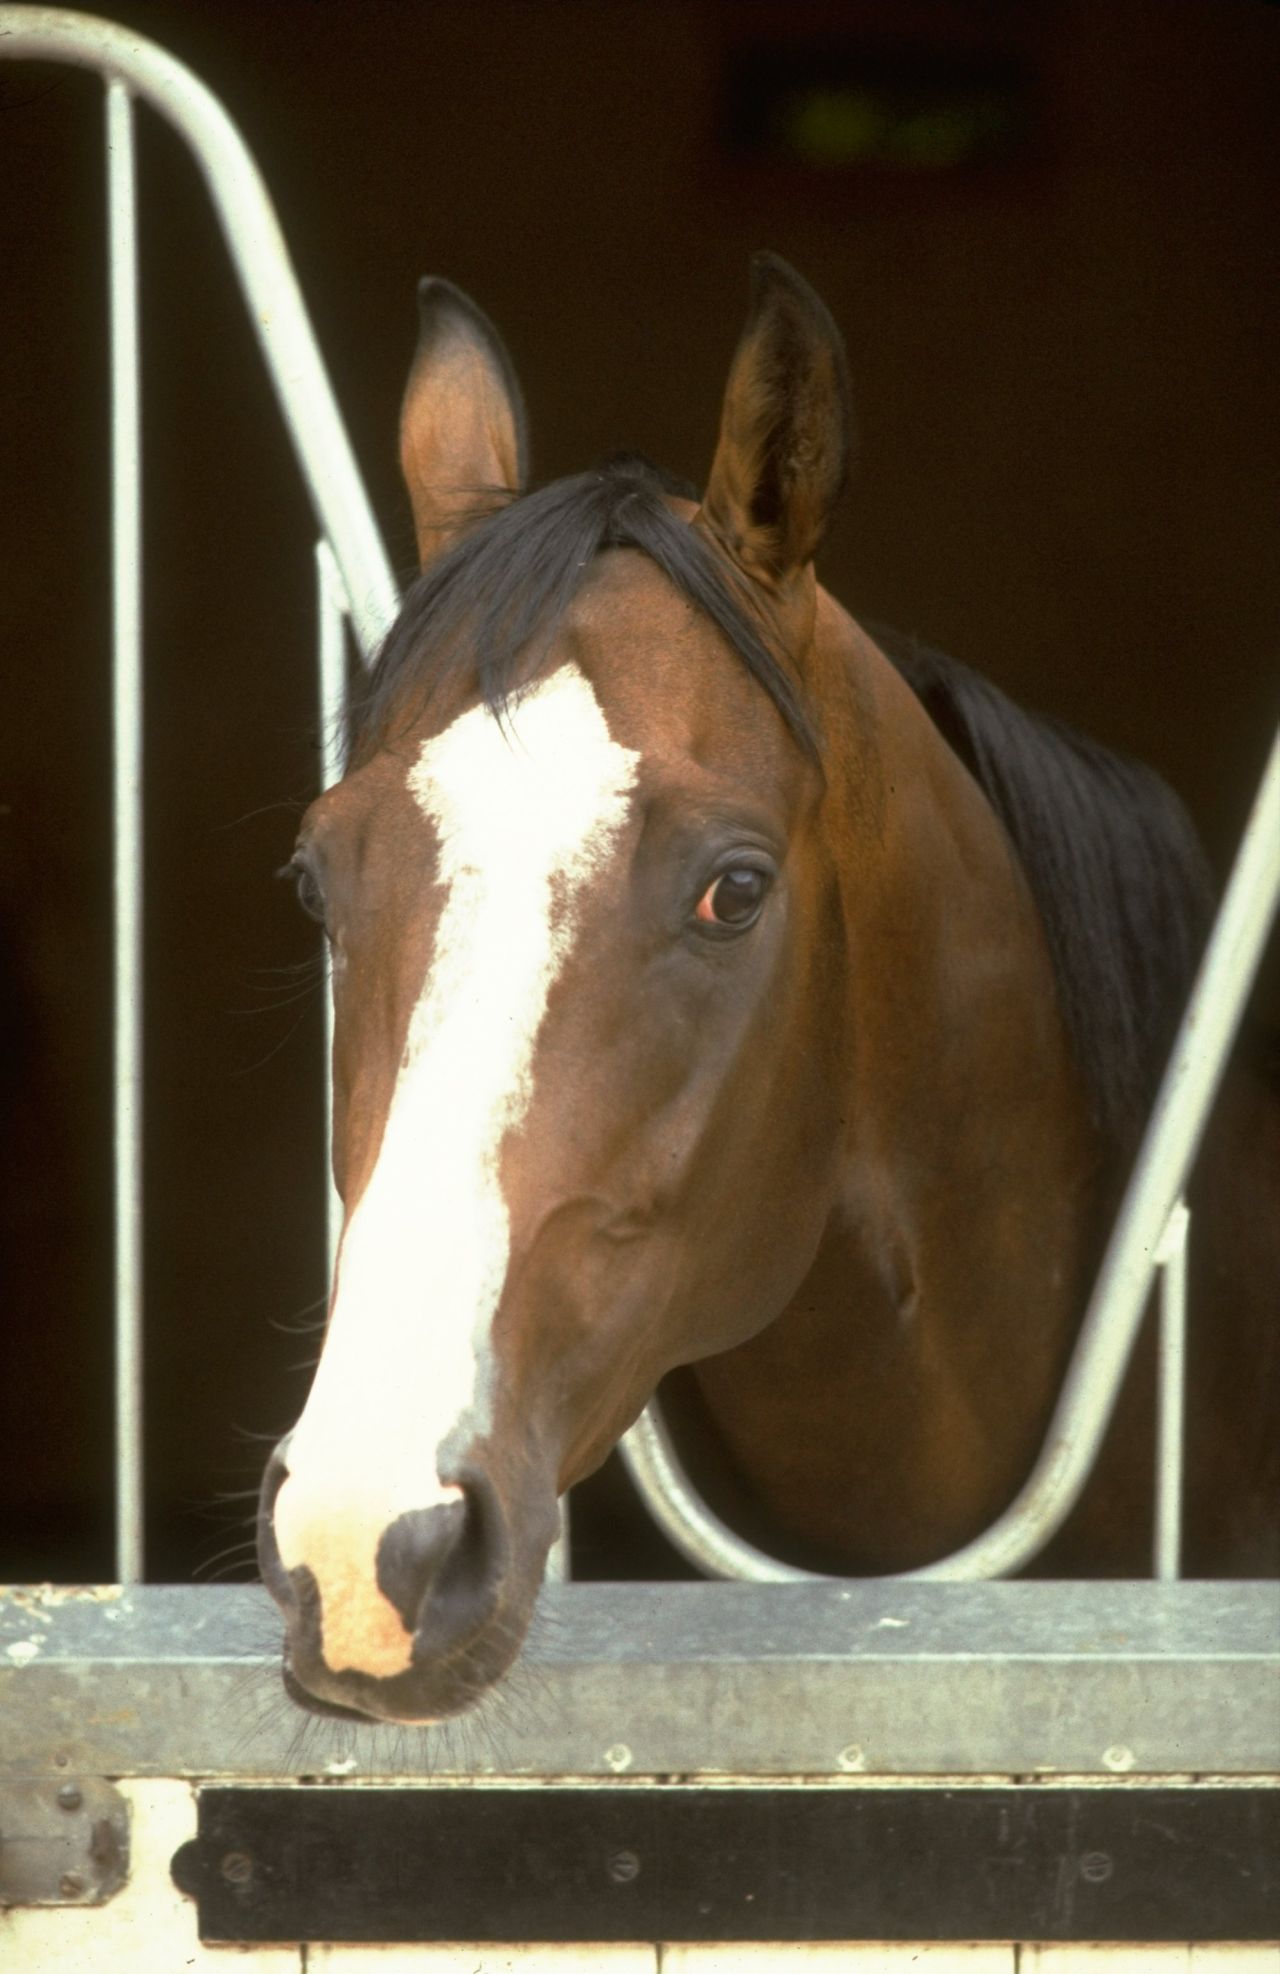 "He was one of those no-nonsense horses, nothing fazed him," Swinburn said of the colt with the distinctive white blaze on his face and four white 'socks.'